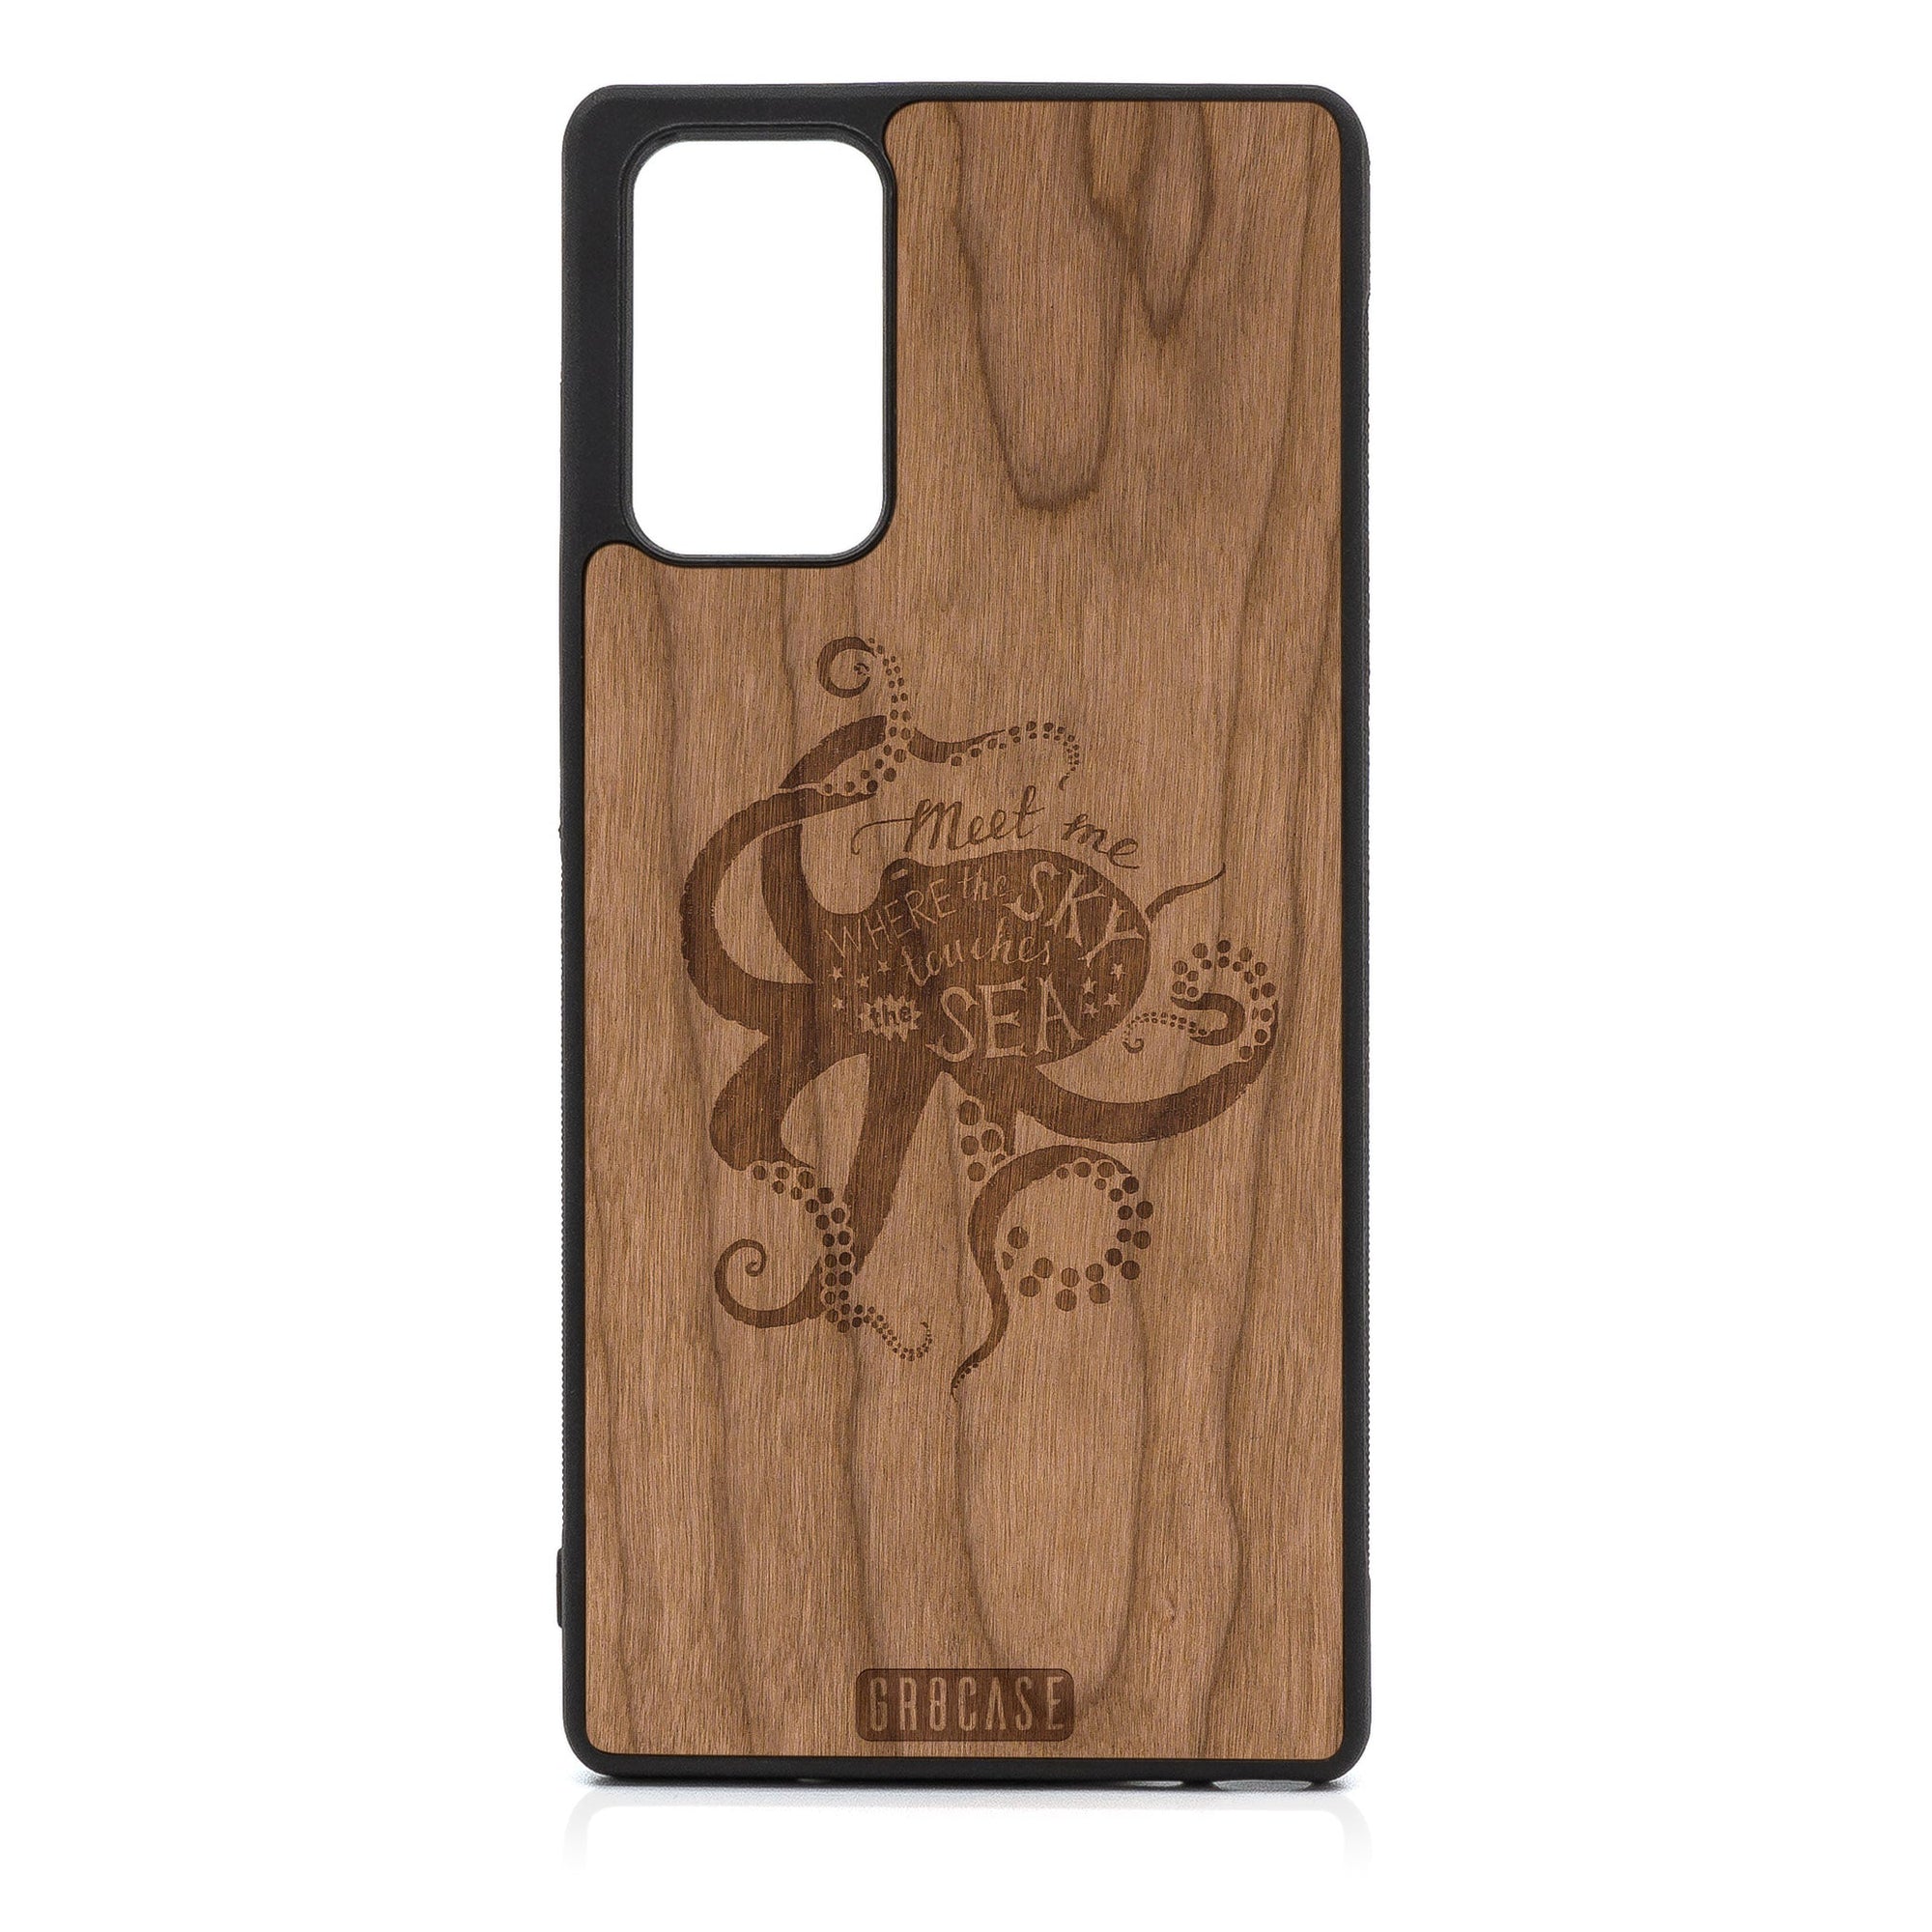 Meet Me Where The Sky Touches The Sea (Octopus) Design Wood Case For Samsung Galaxy A52 5G